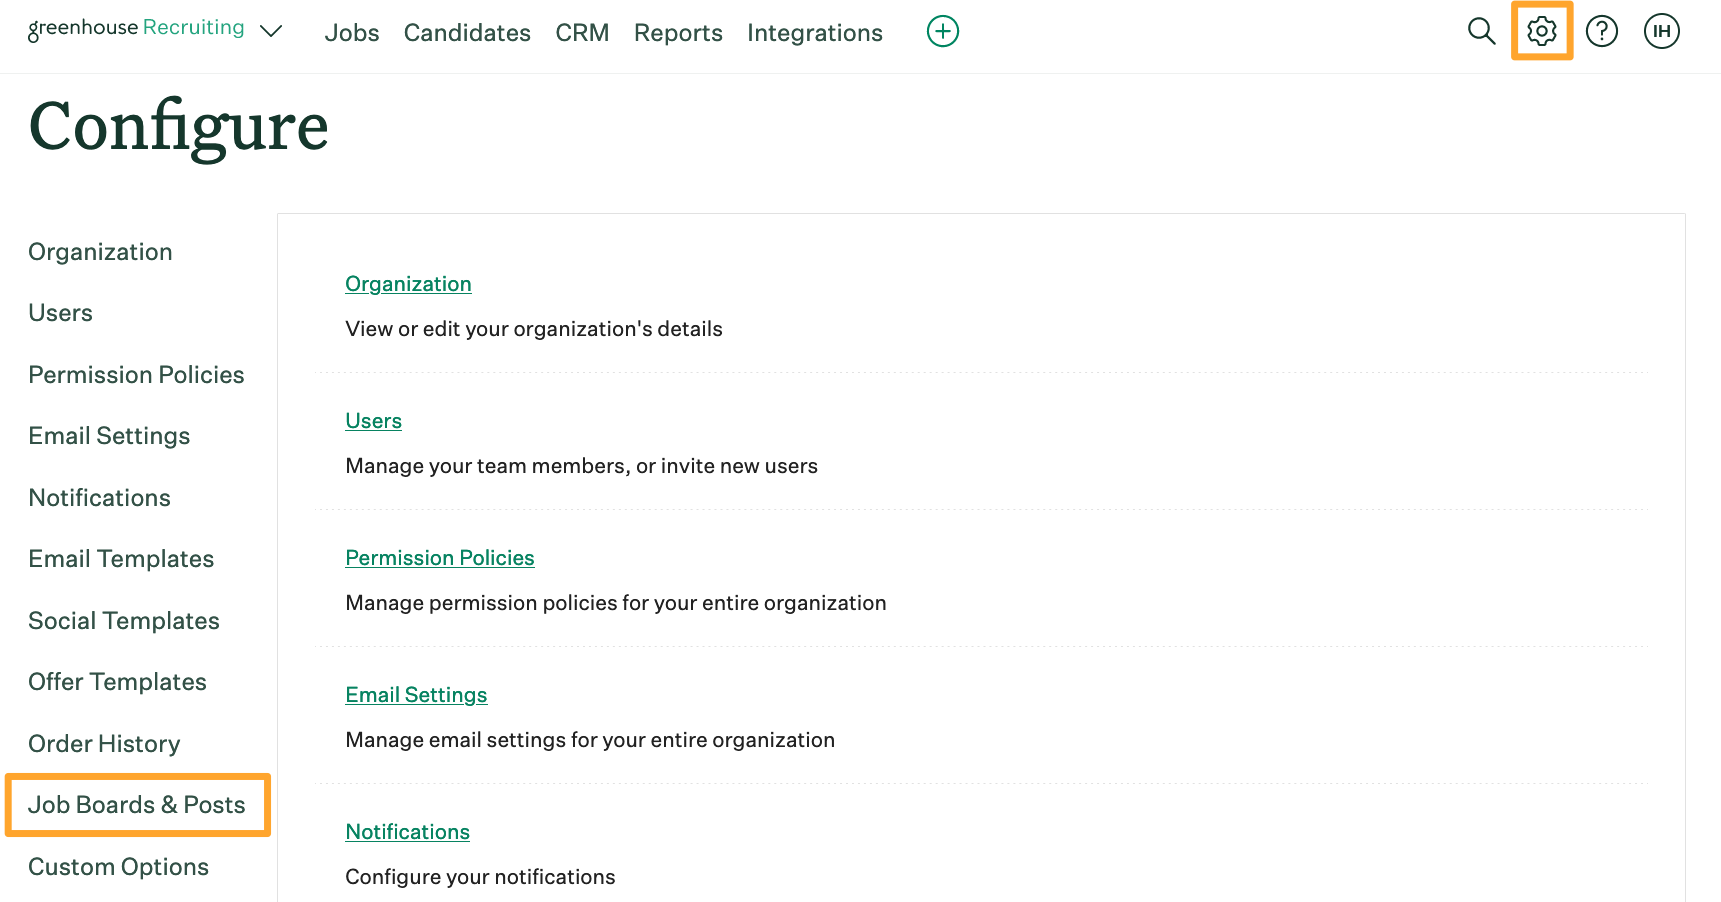 Screenshot of the job boards and posts link